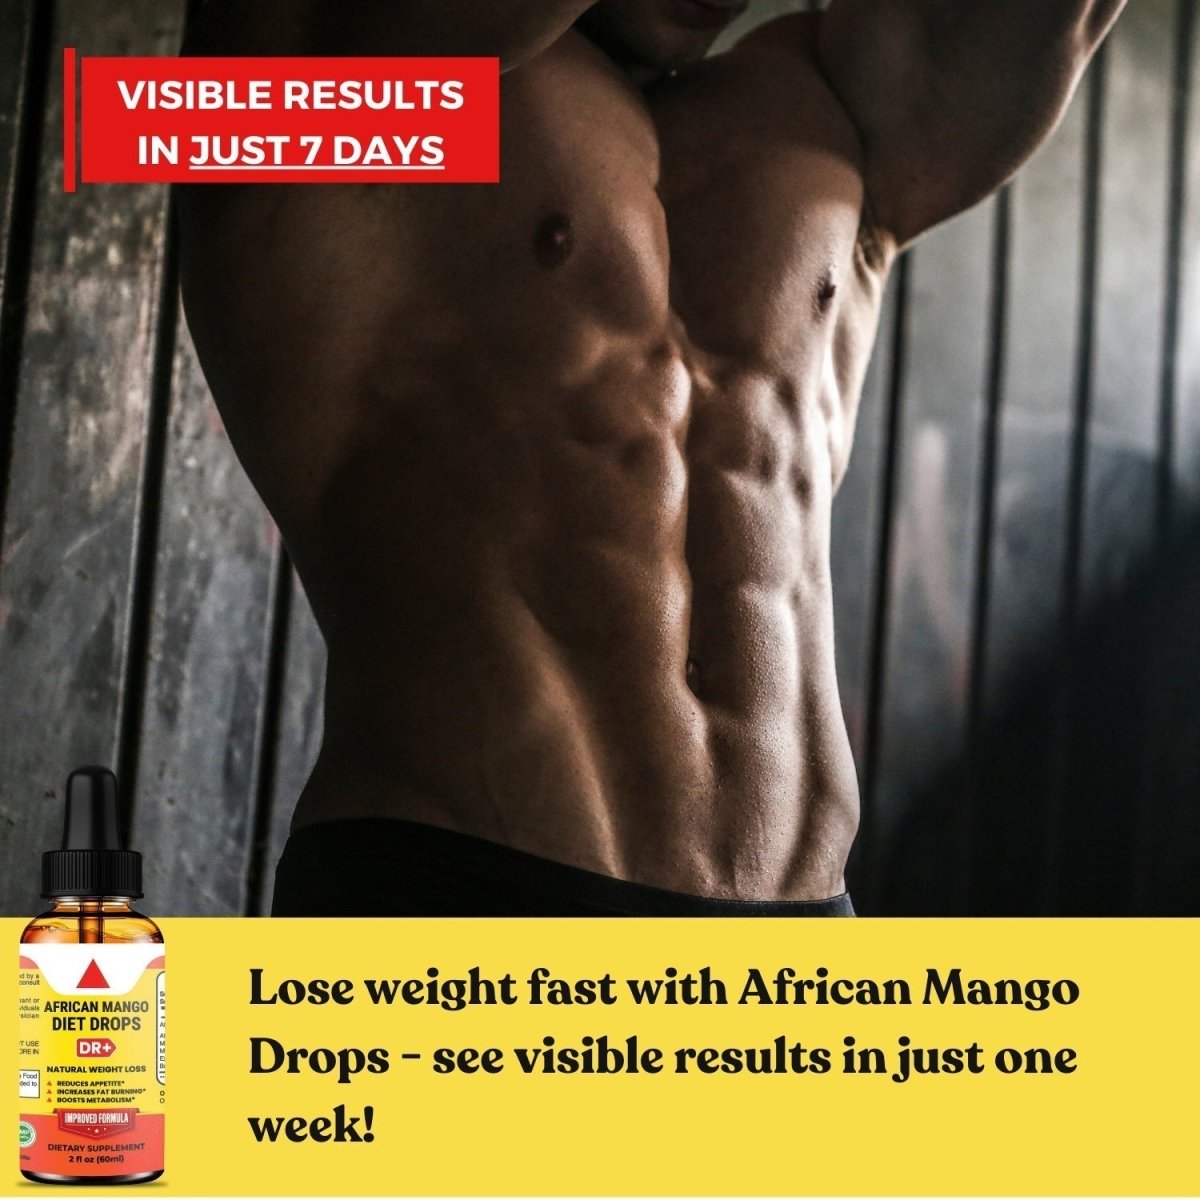 African Mango Wellness Drops - Diet Drops Suppress Appetite Burn Fat Boost Energy Fast Results 2oz | 6-Pack